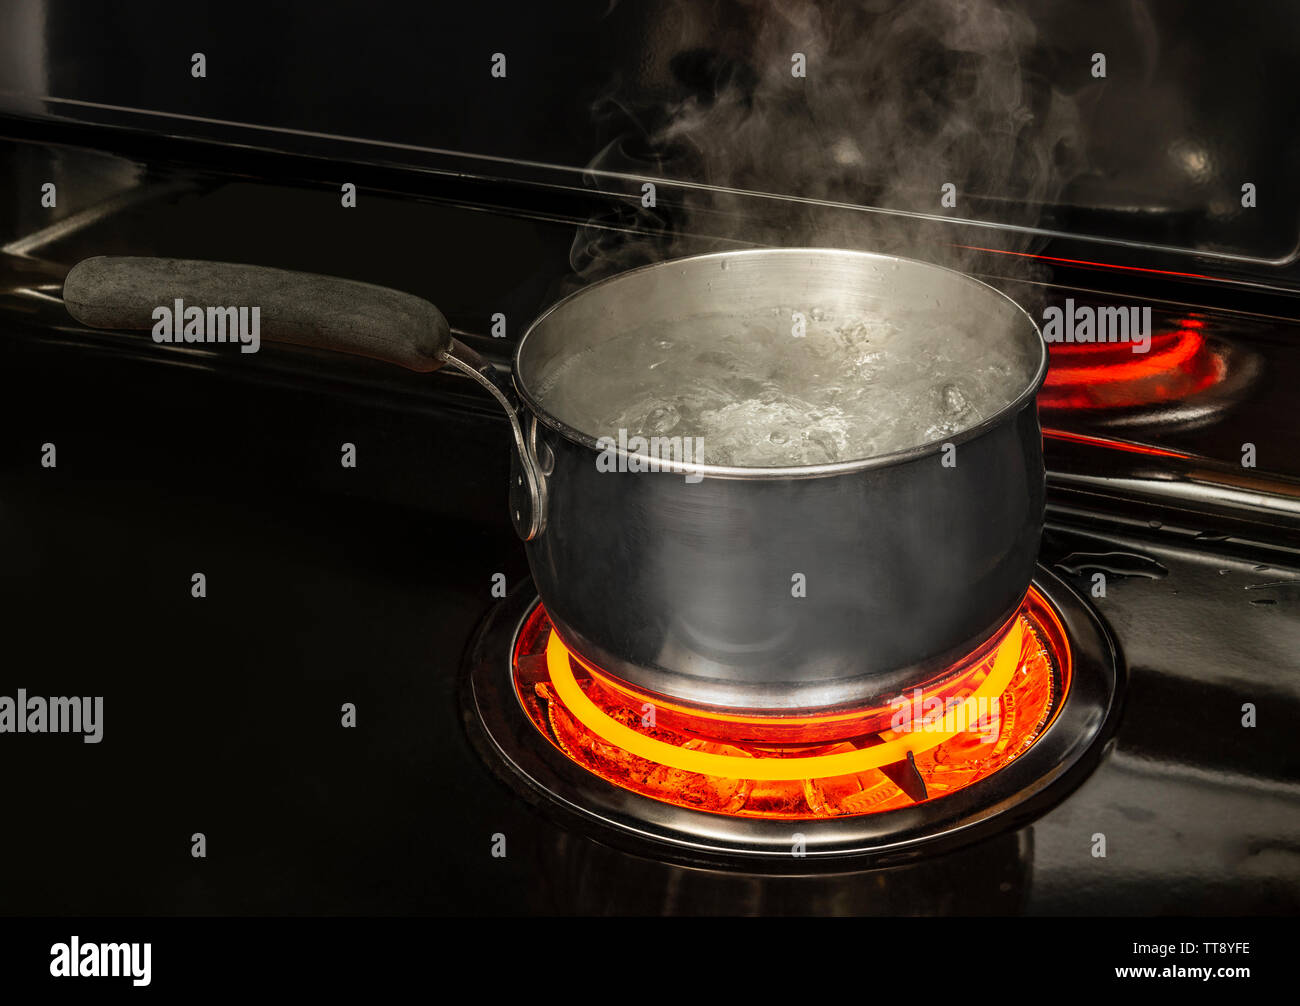 https://c8.alamy.com/comp/TT8YFE/horizontal-shot-of-a-boiling-pot-of-water-on-a-stovetop-with-a-glowing-red-element-with-copy-space-TT8YFE.jpg